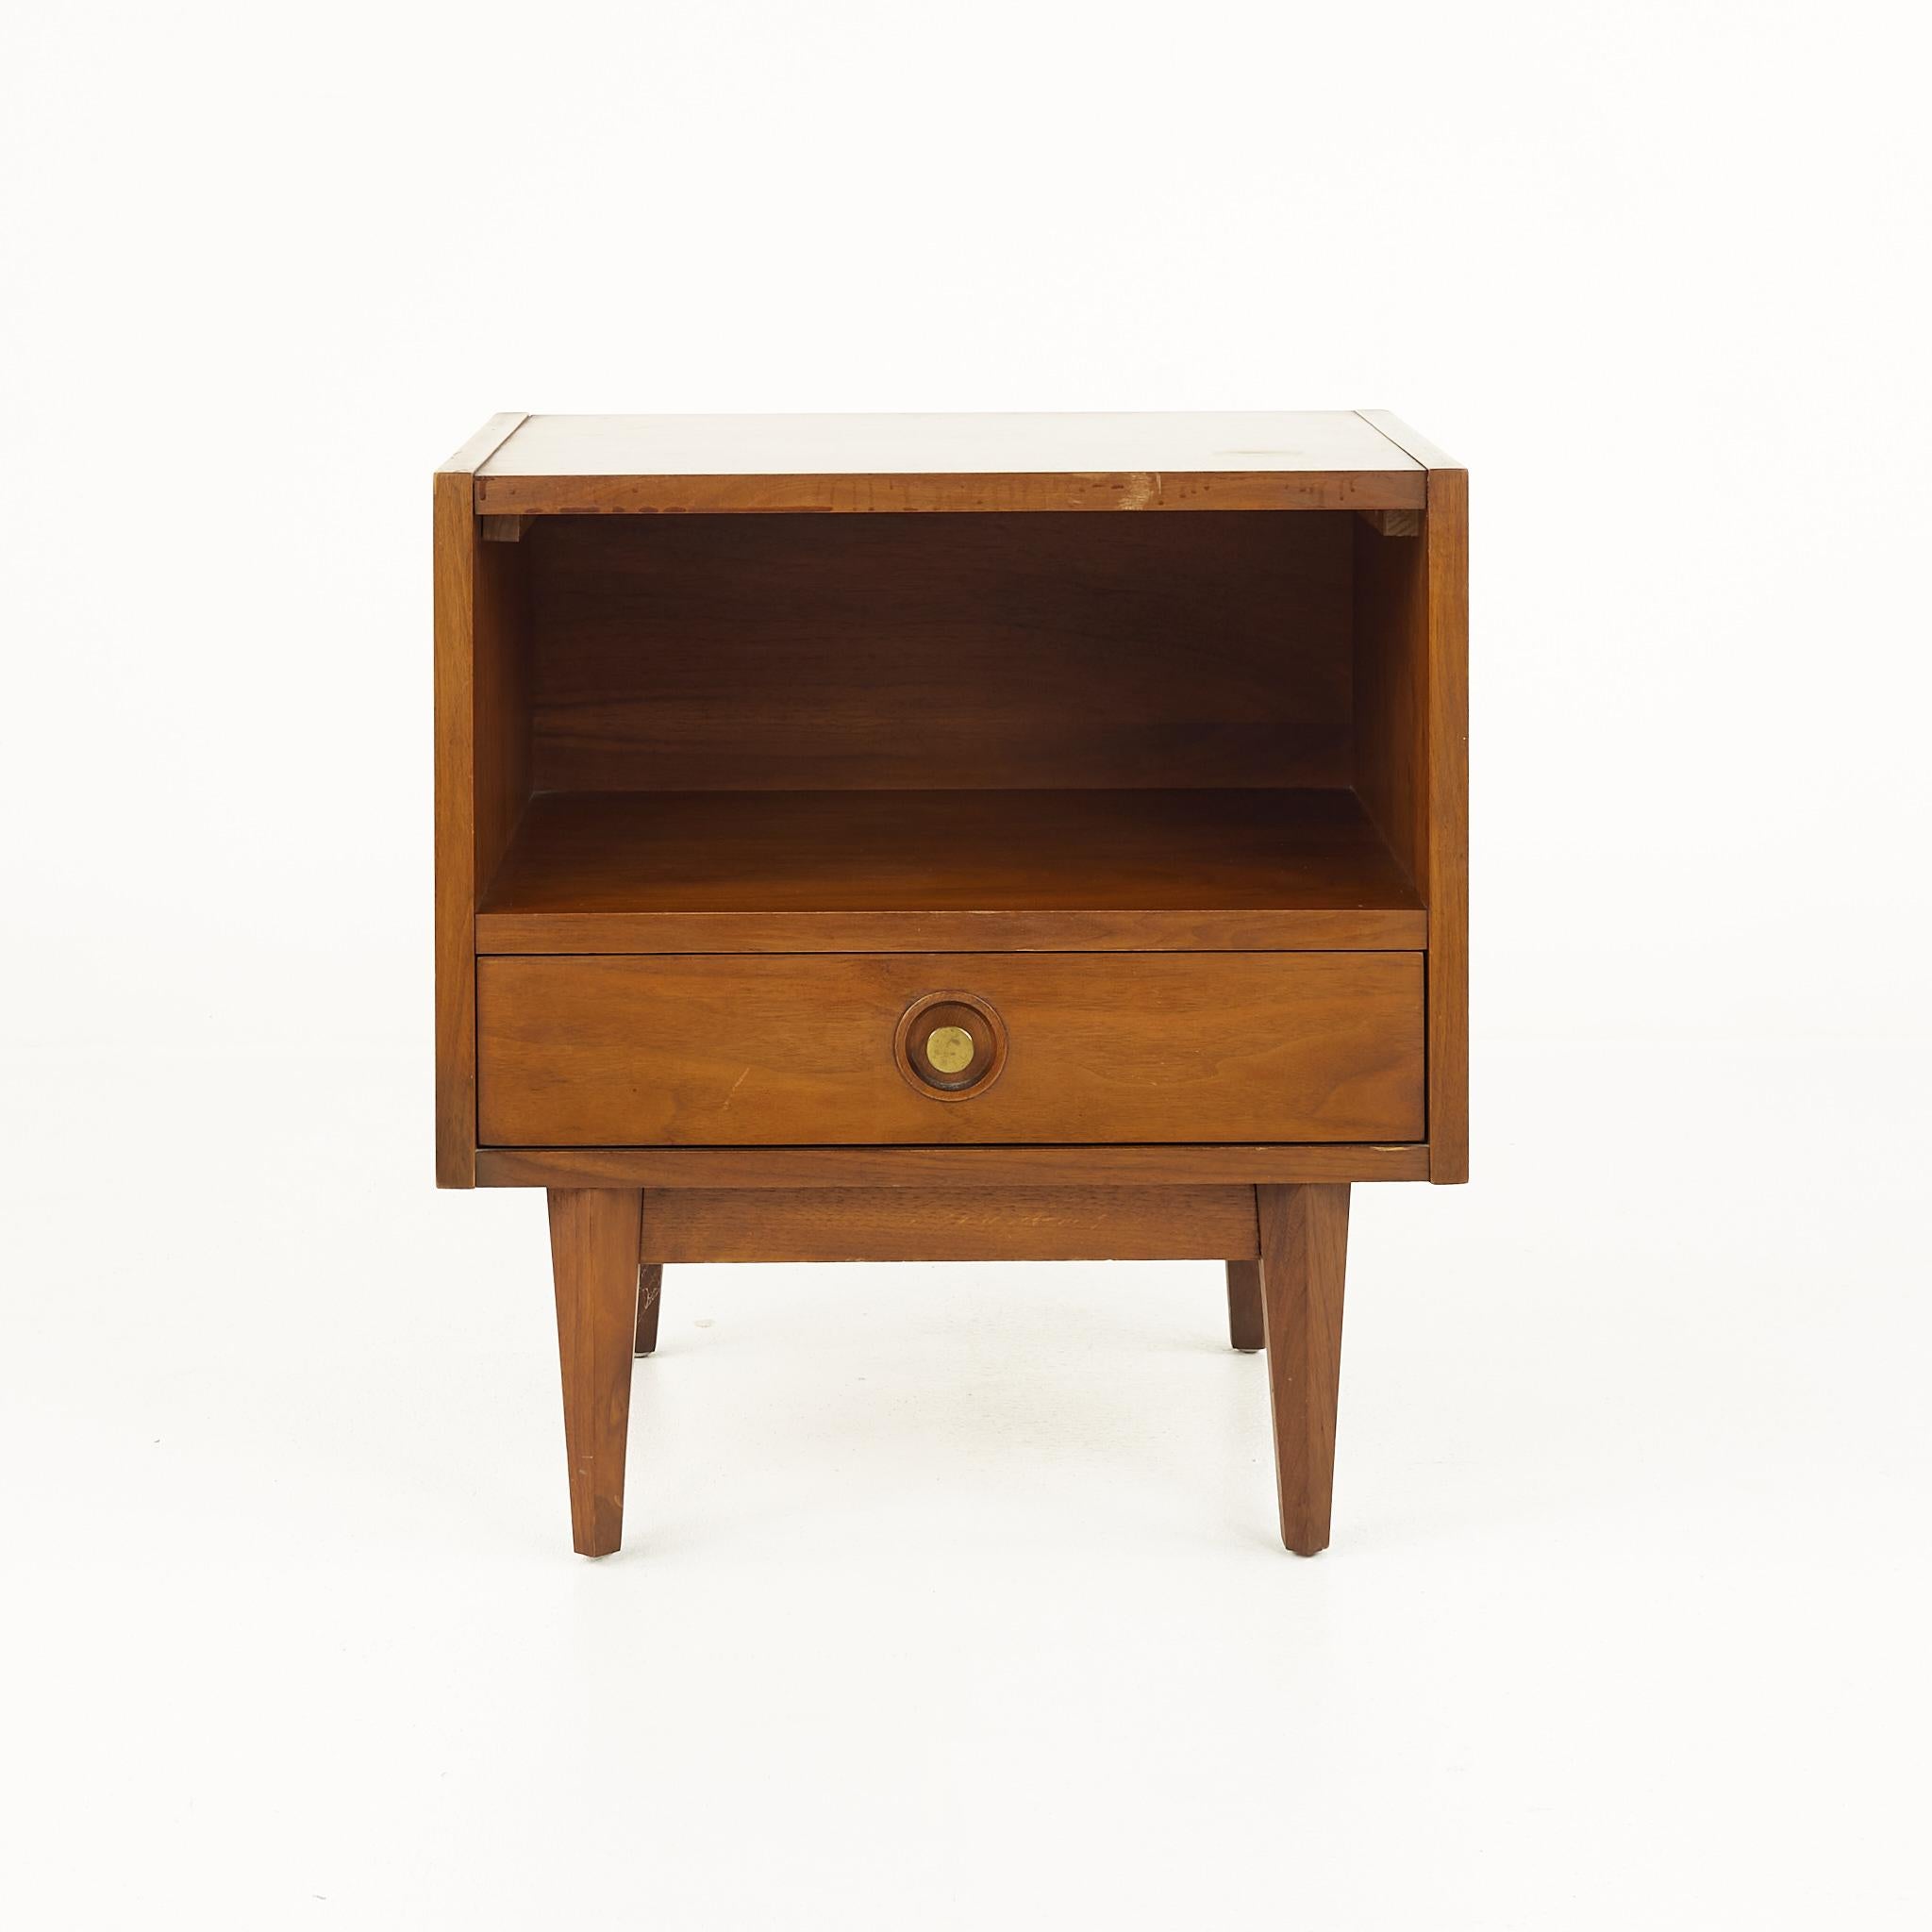 Albert Parvin for American of Martinsville mid century nightstand

This nightstand measures: 21 wide x 16 deep x 22.5 inches high

All pieces of furniture can be had in what we call restored vintage condition. That means the piece is restored